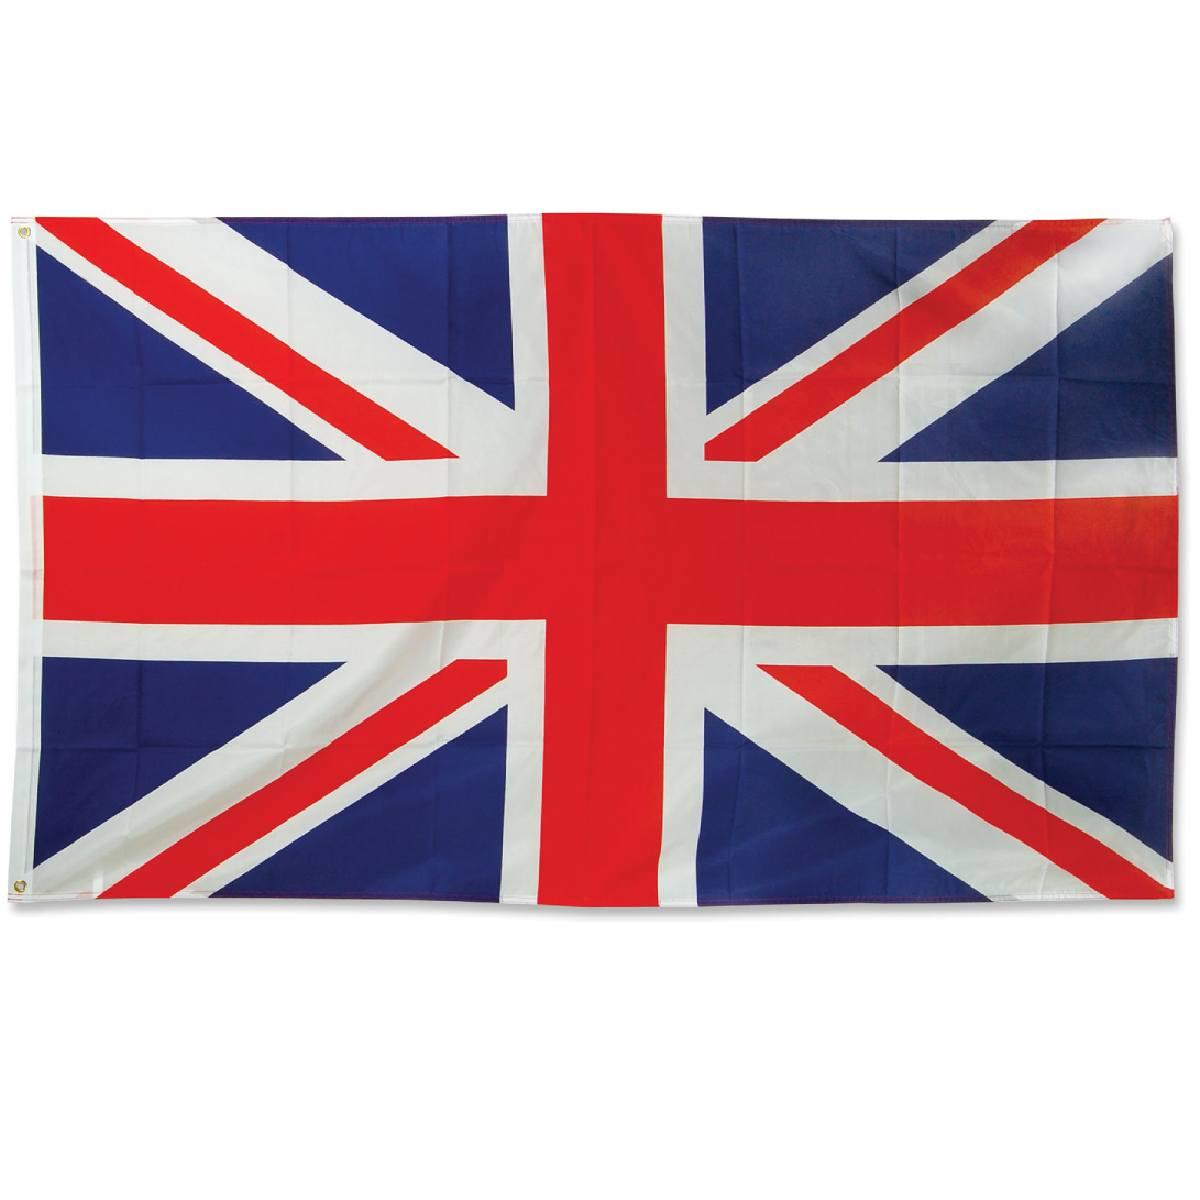 Union Flag or Union Jack Polyester Flag 5ft x 3ft or 150cm x 90cm by Forum Novelties PG013 available here at Karnival Costumes online party shop